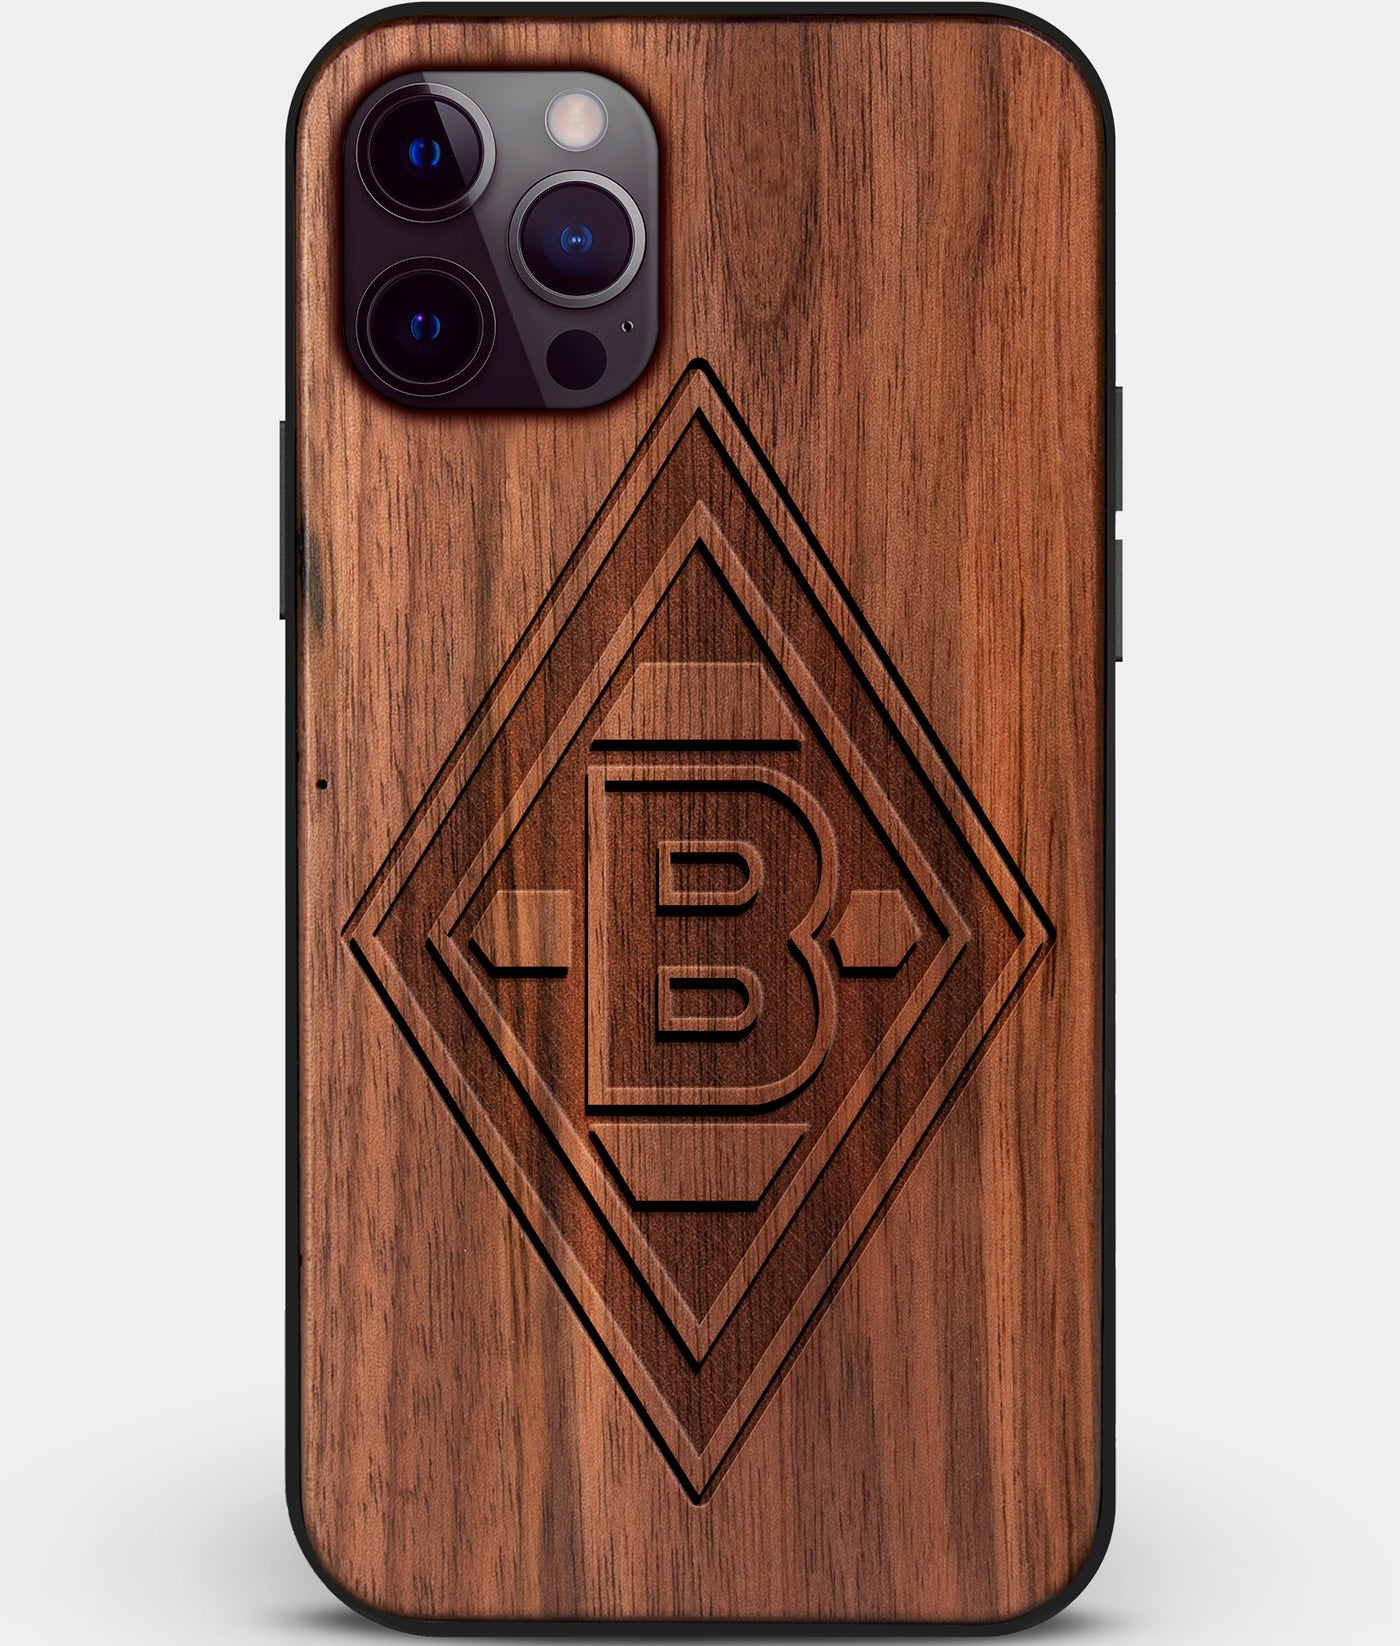 Custom Carved Wood Borussia Monchengladbach iPhone 12 Pro Max Case | Personalized Walnut Wood Borussia Monchengladbach Cover, Birthday Gift, Gifts For Him, Monogrammed Gift For Fan | by Engraved In Nature